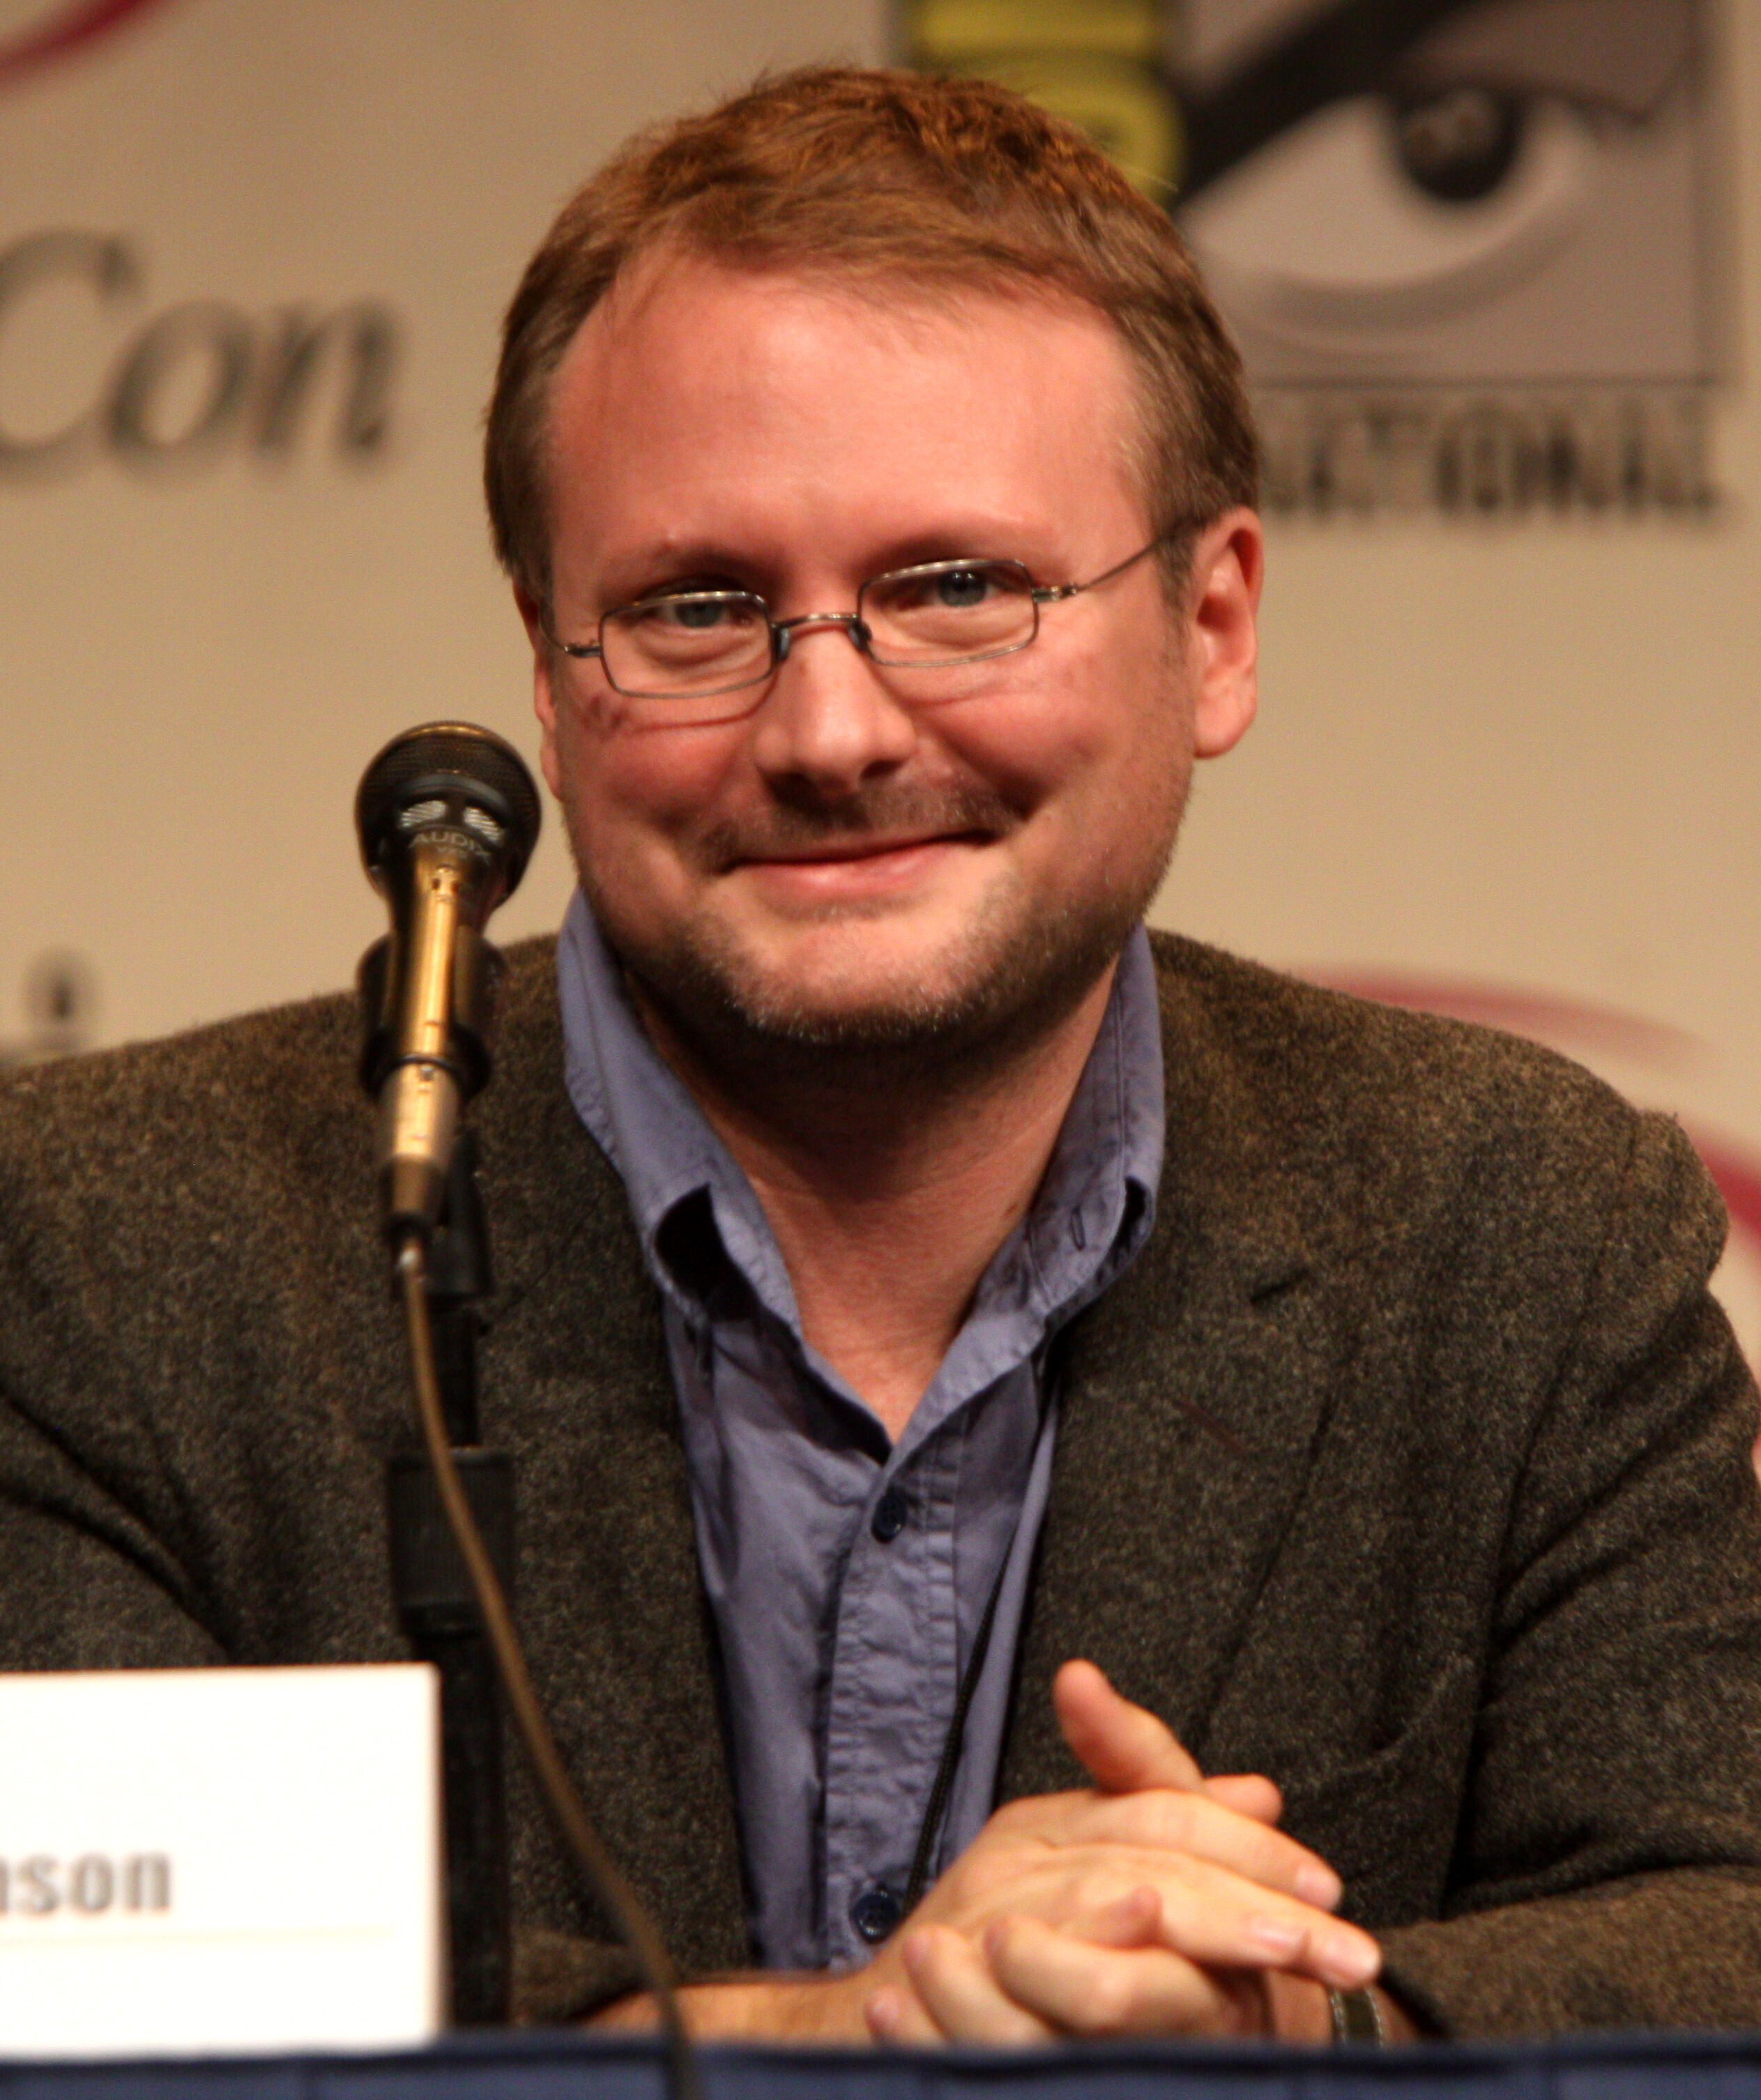 Rian Johnson's Movies & Directing Style [with Shot List Example]